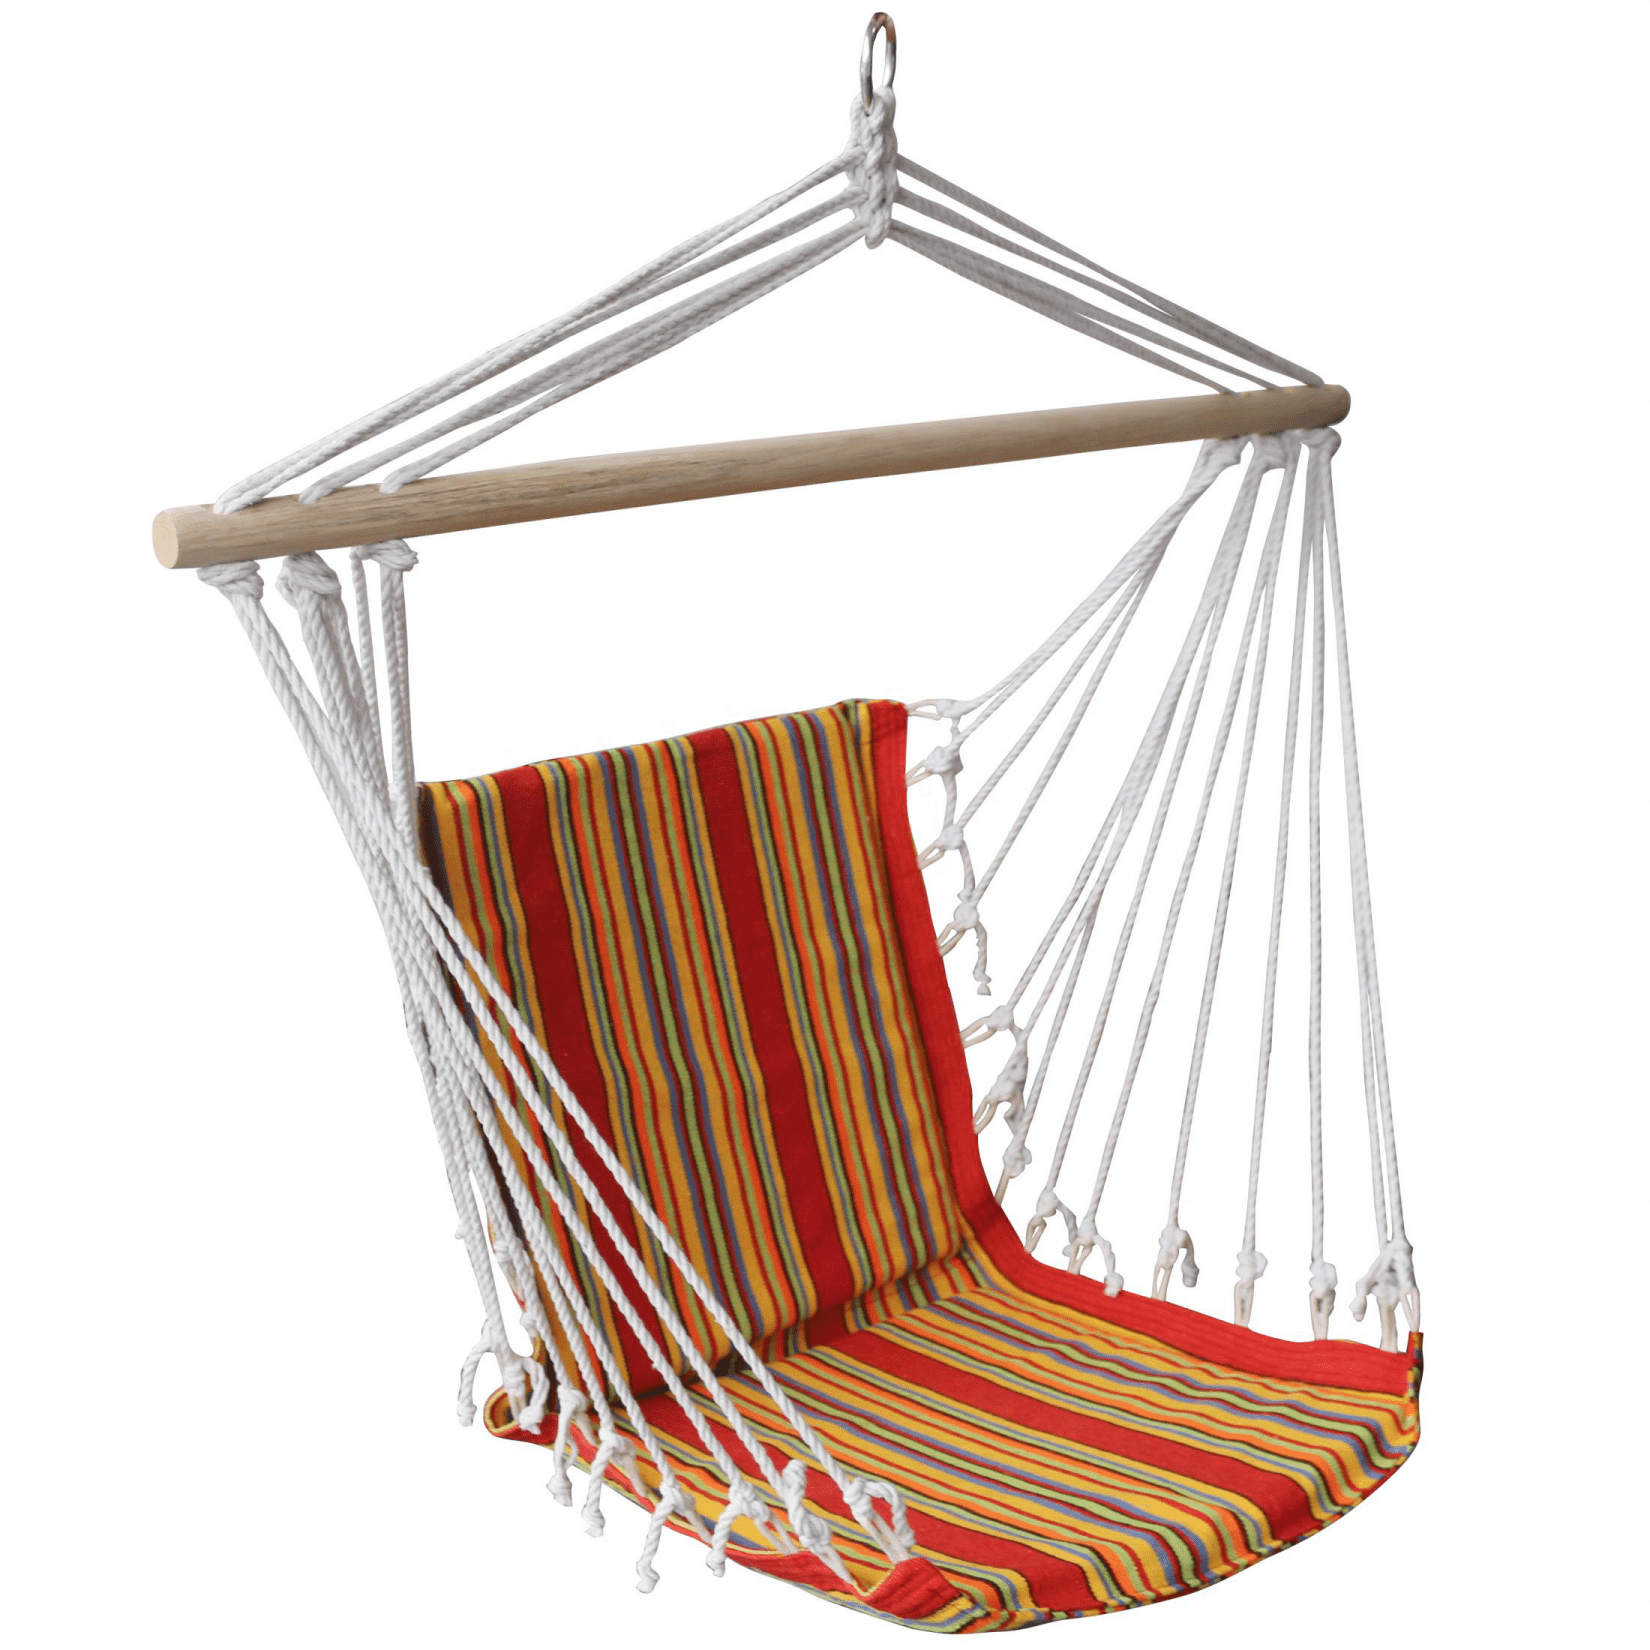 Excellent quality Steel Hammock Stand - Pol.ycotton hammock chair with woodbar – Top Asian